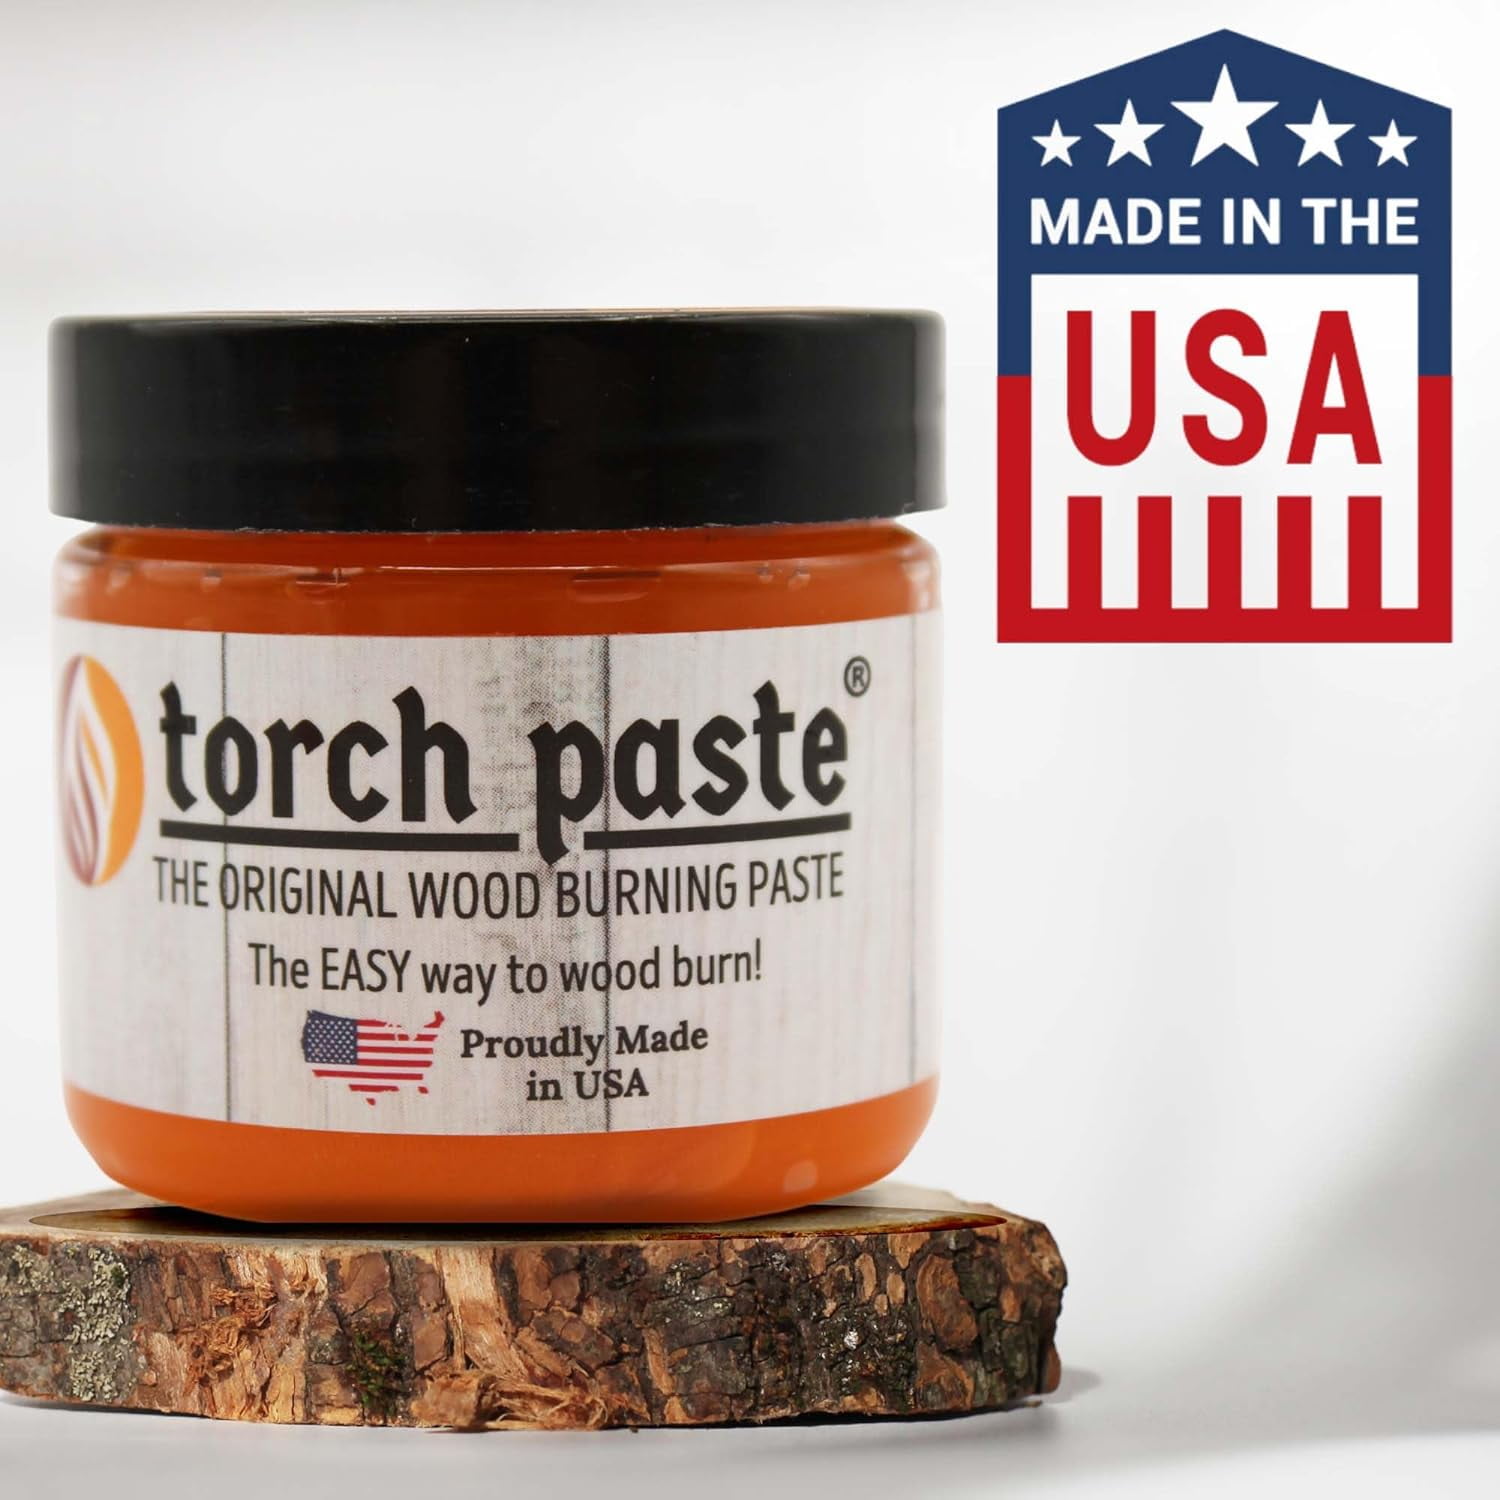 TIPS FOR USING TORCH PASTE ON WOOD – Torch Paste